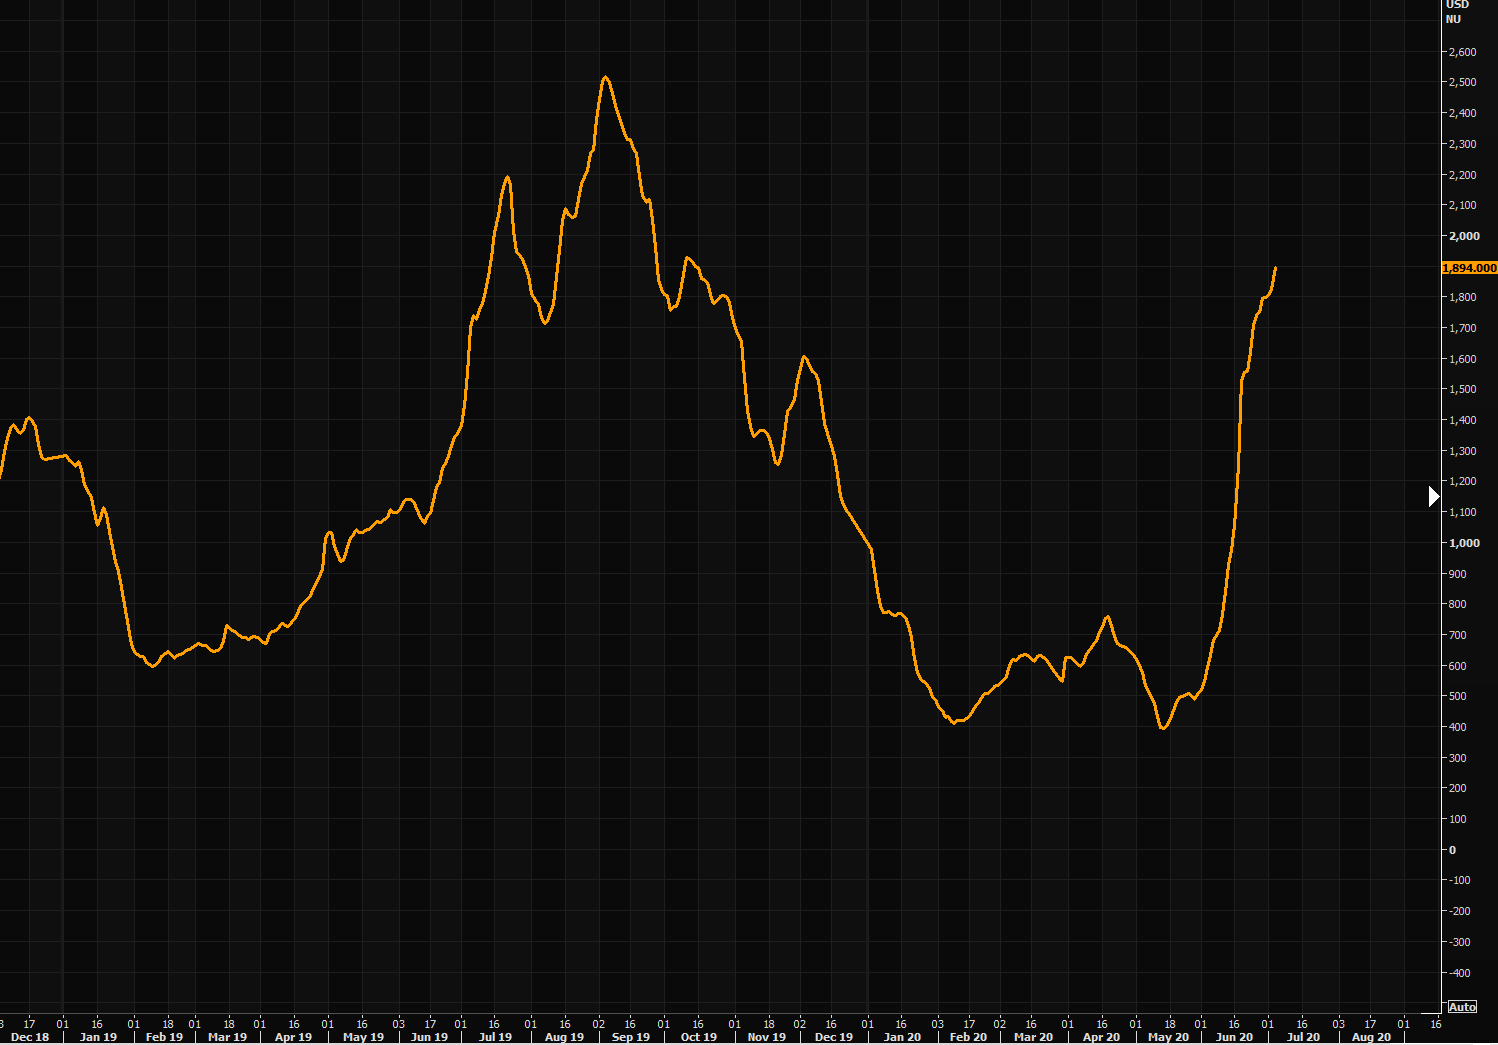 Baltic dry - can't get enough